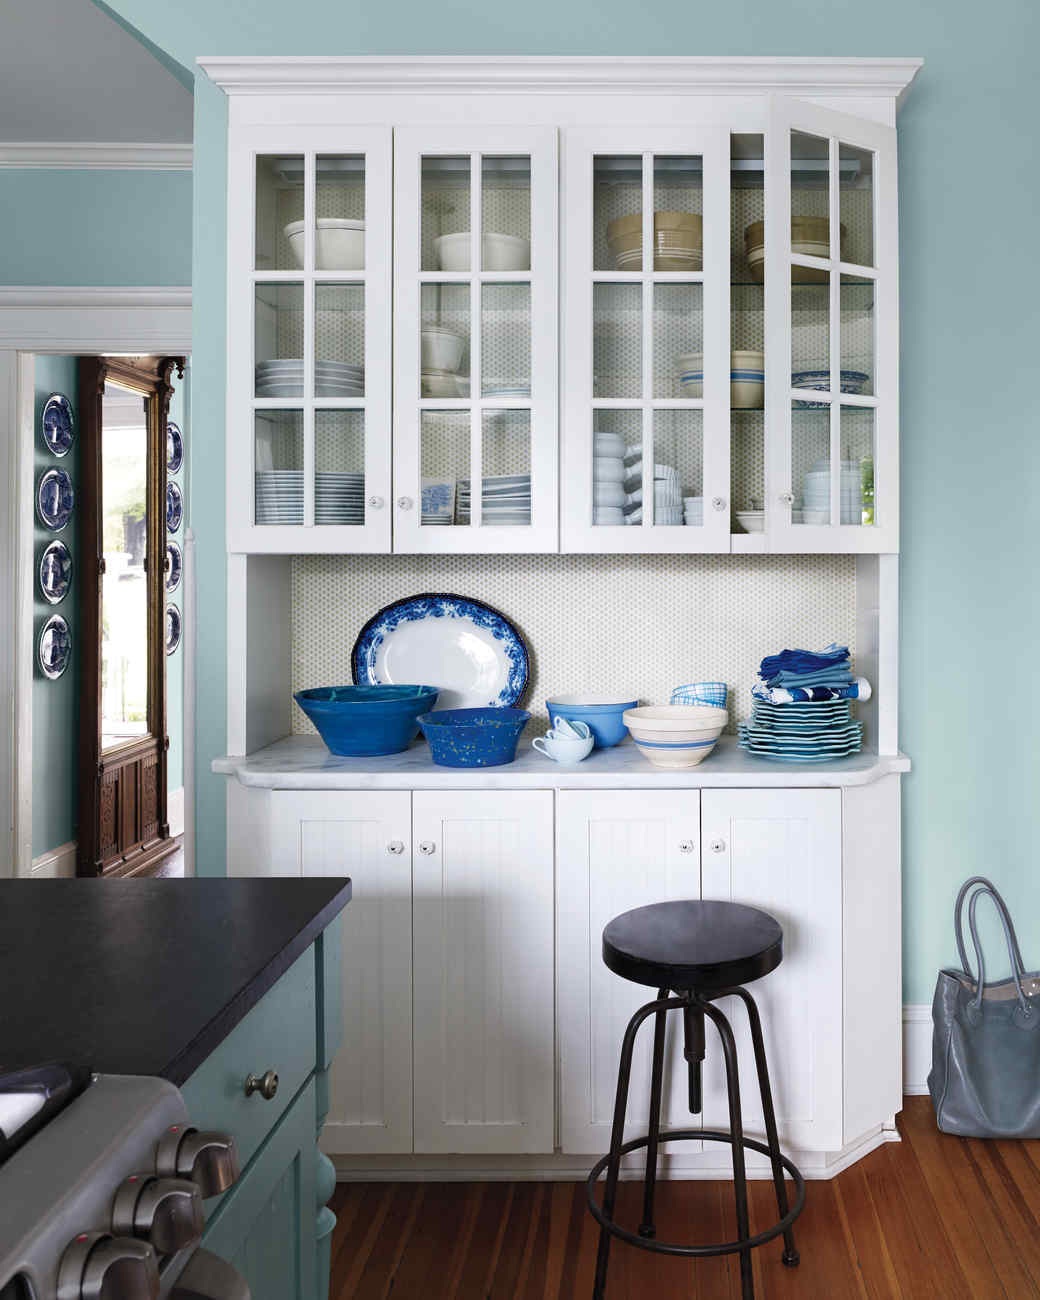 kitchen0199189-md110699_vert 6 Affordable Organizing and Decoration Ideas for your Kitchen